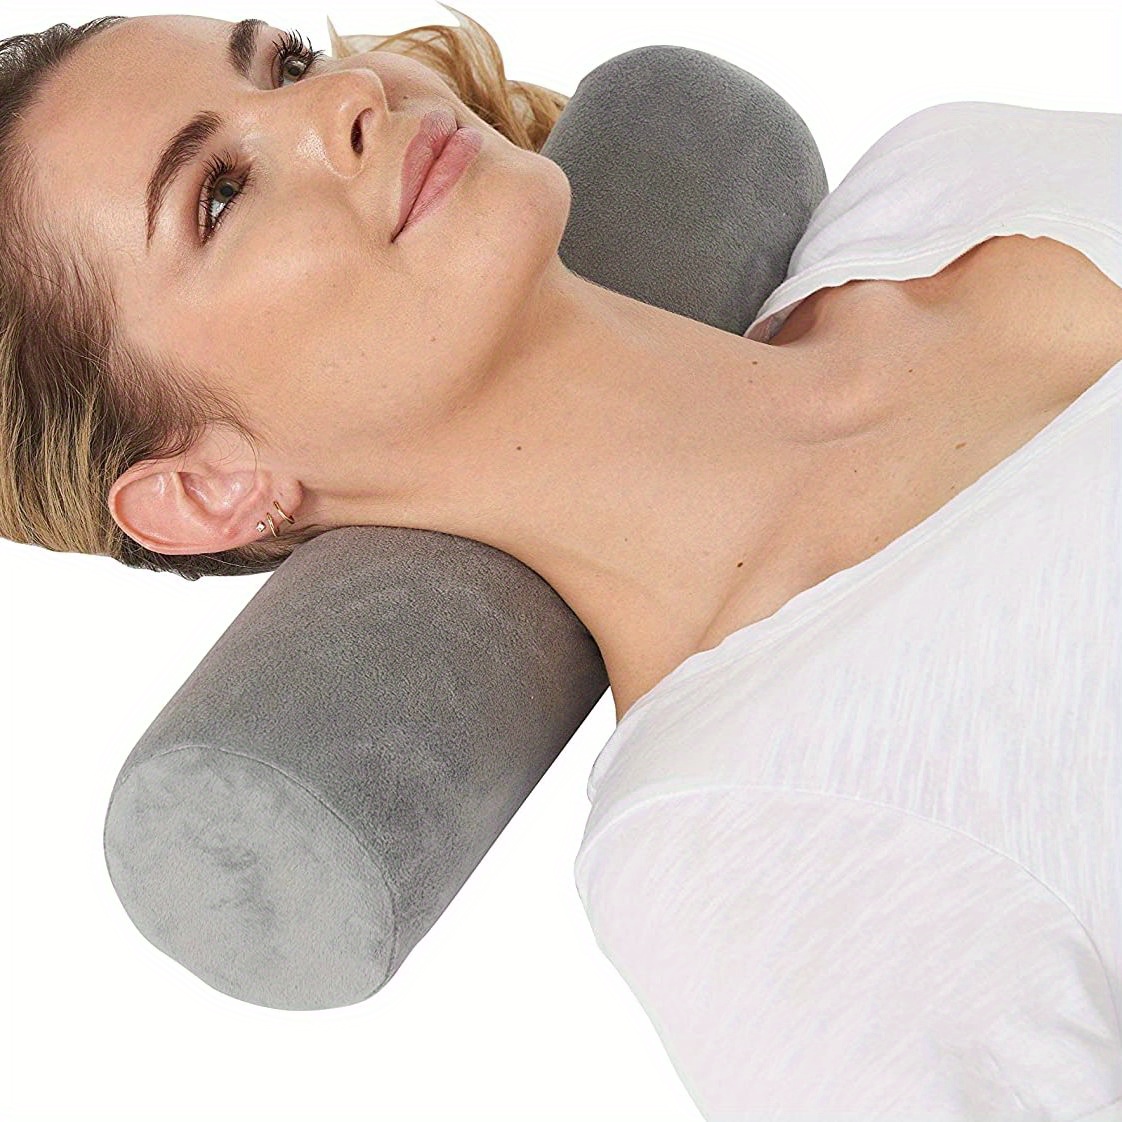 This new travel pillow design was inspired by massage chairs